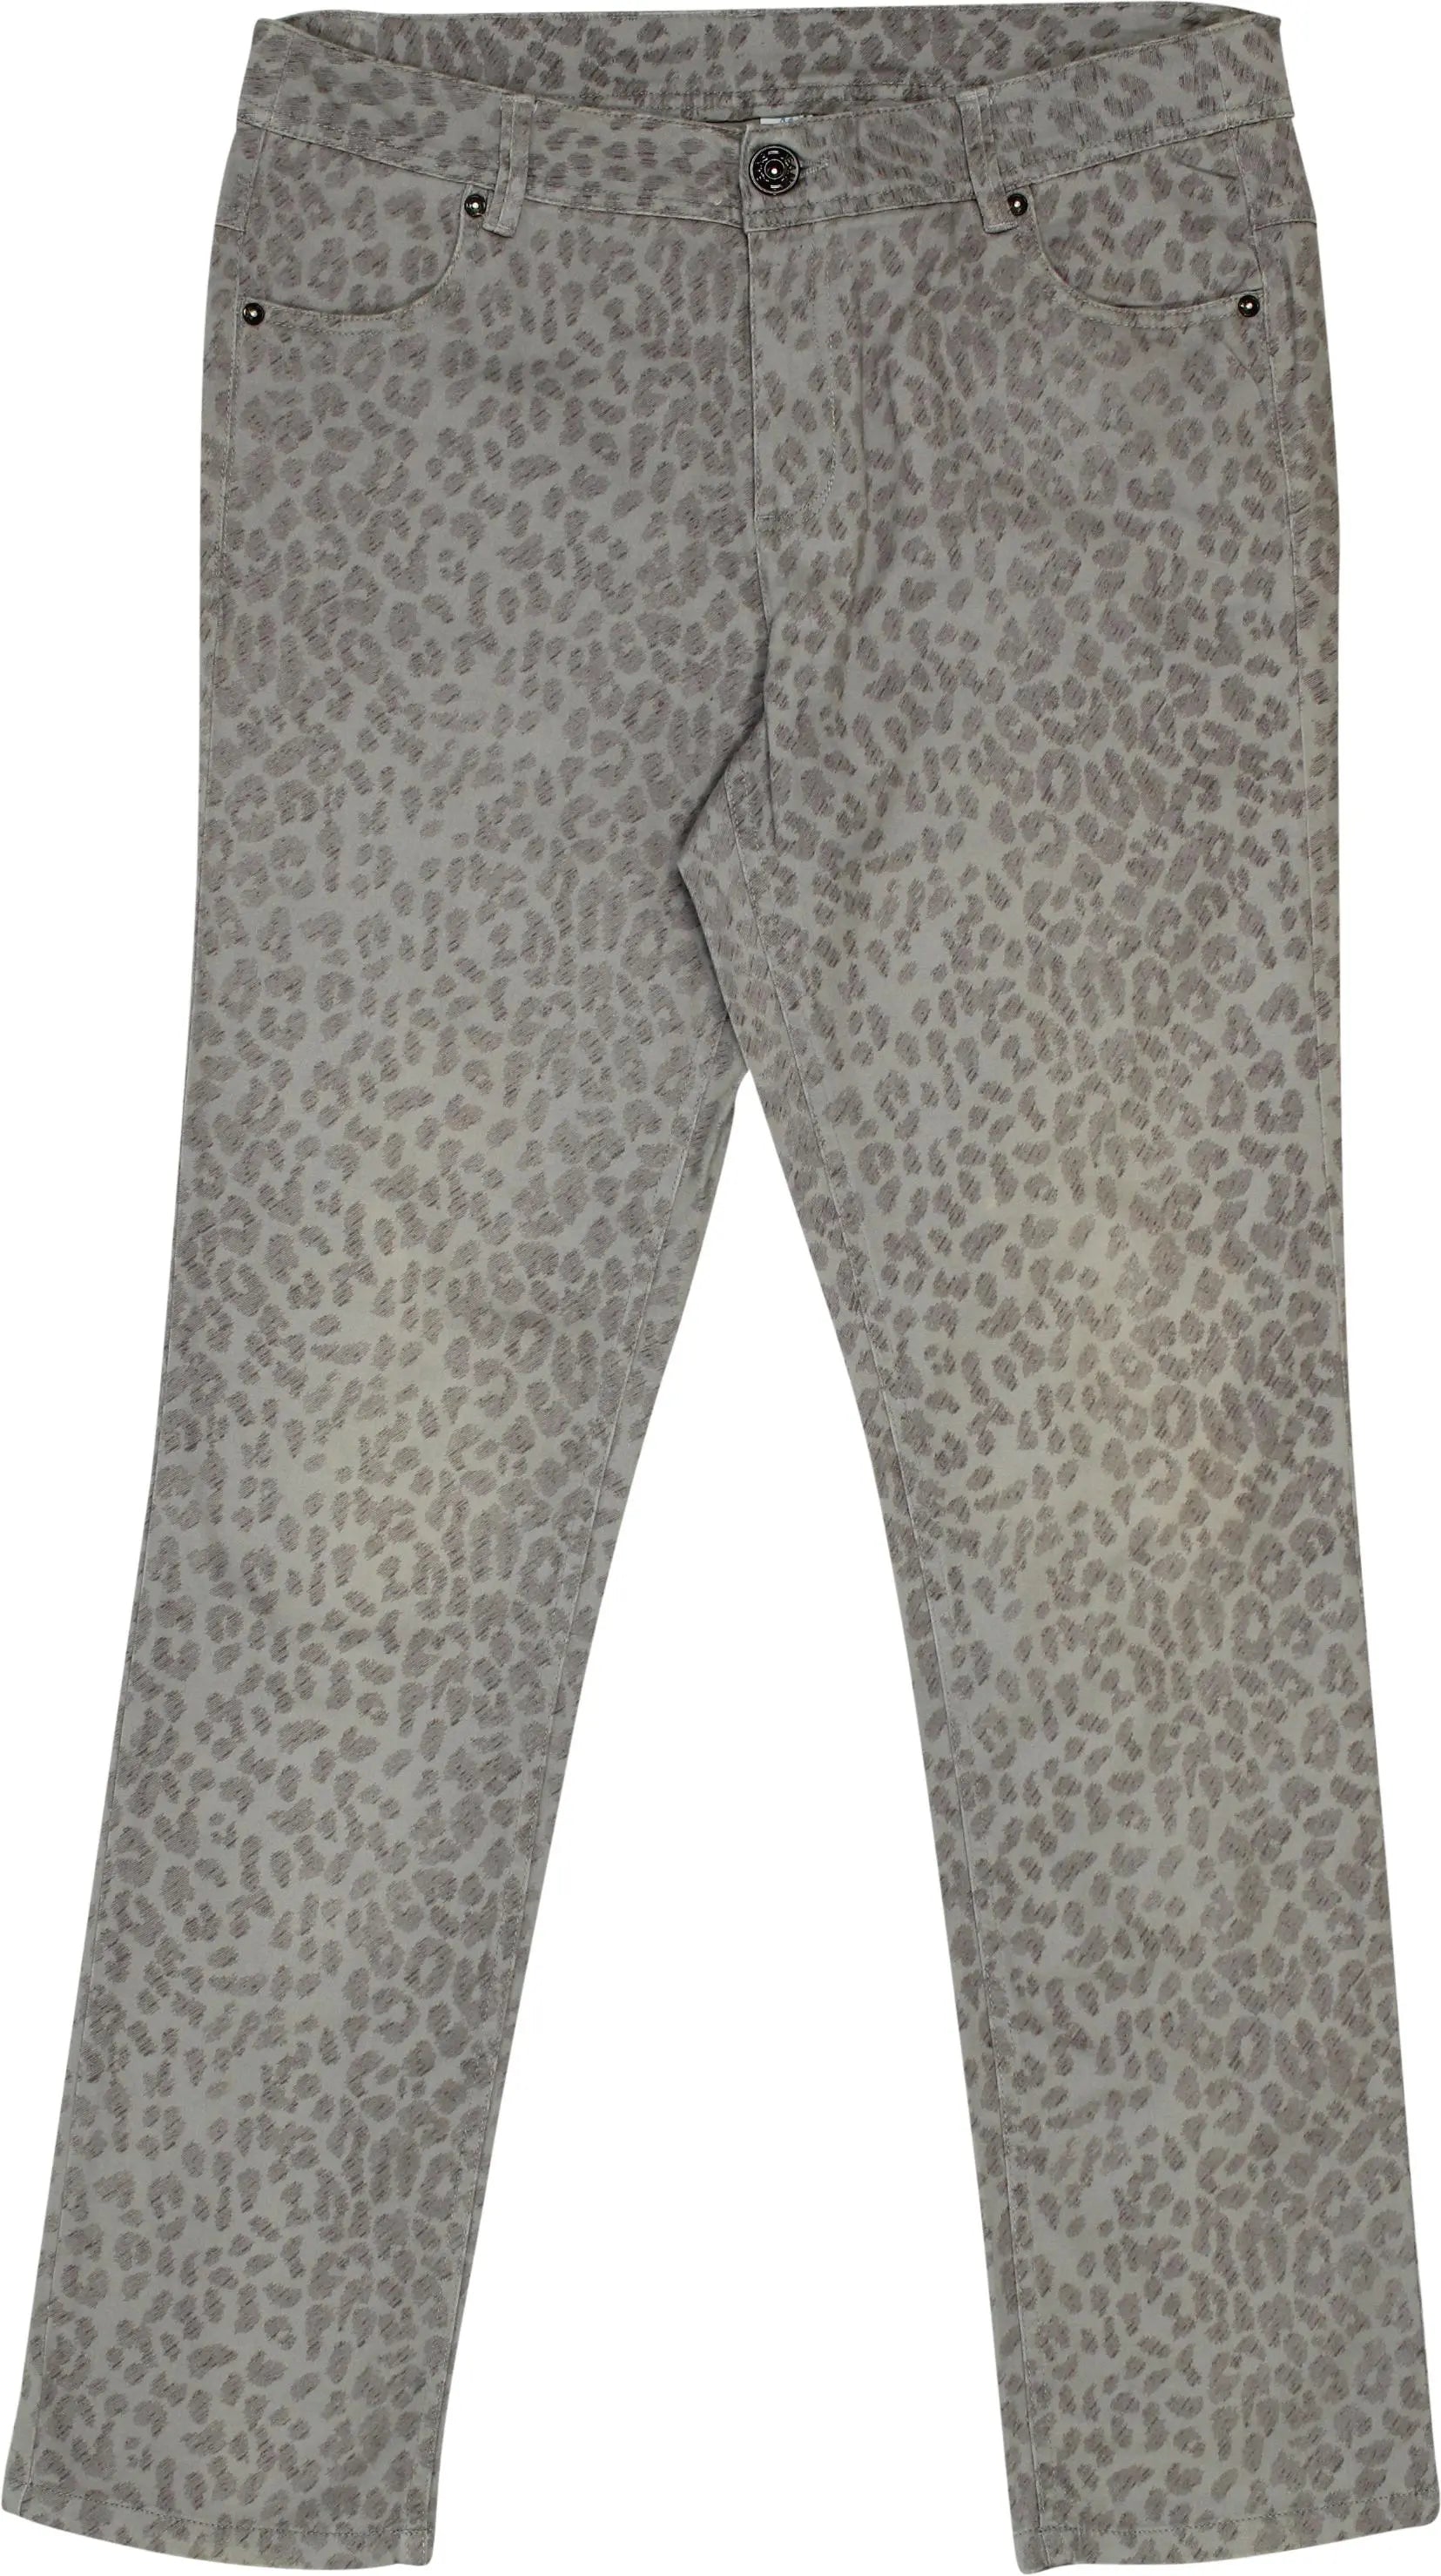 M&S - Animal Printed Pants- ThriftTale.com - Vintage and second handclothing